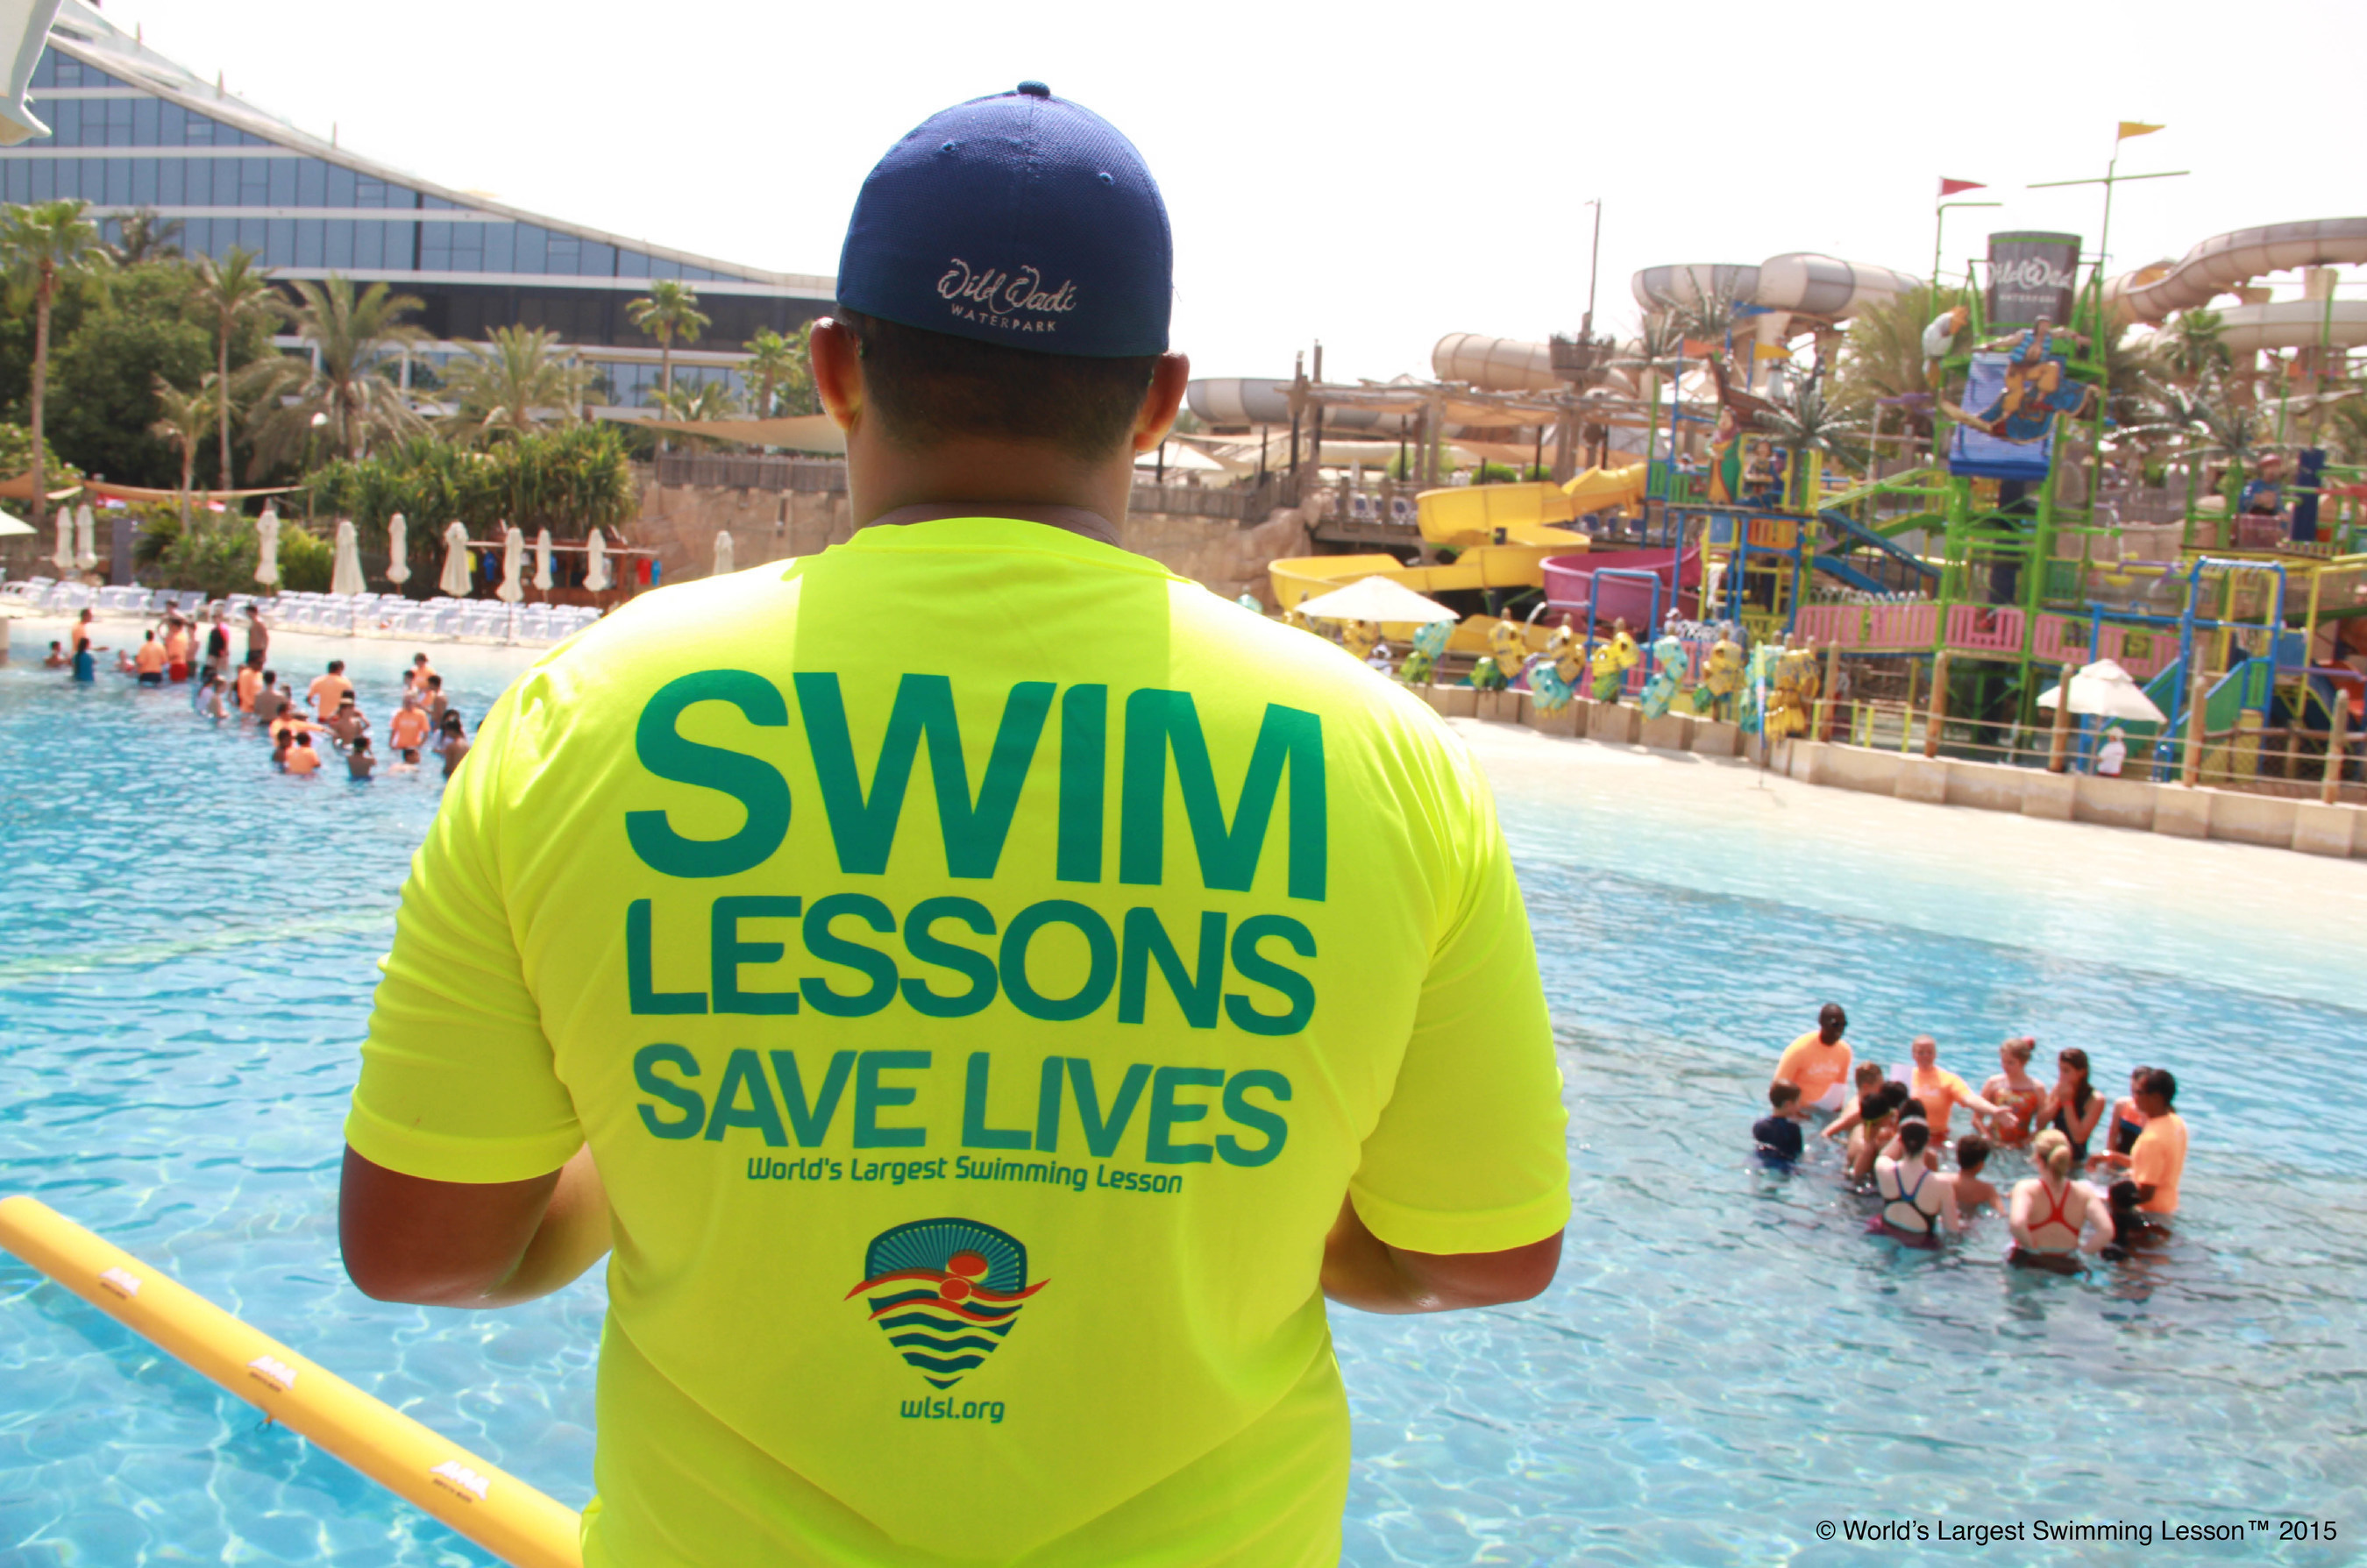 World's Largest Swimming Lesson Set for Friday, June 24th. Tens of thousands of kids join Life-saving, global event to raise awareness about the importance of teaching children to swim to prevent childhood drowning - the leading cause of accidental death for children ages 1-4. More drowning and near drowning accidents occur in June than in any other month. More than 700 aquatic facilities set to participate in 20 countries. Registration extended through June 14th. Learn more at WLSL.org